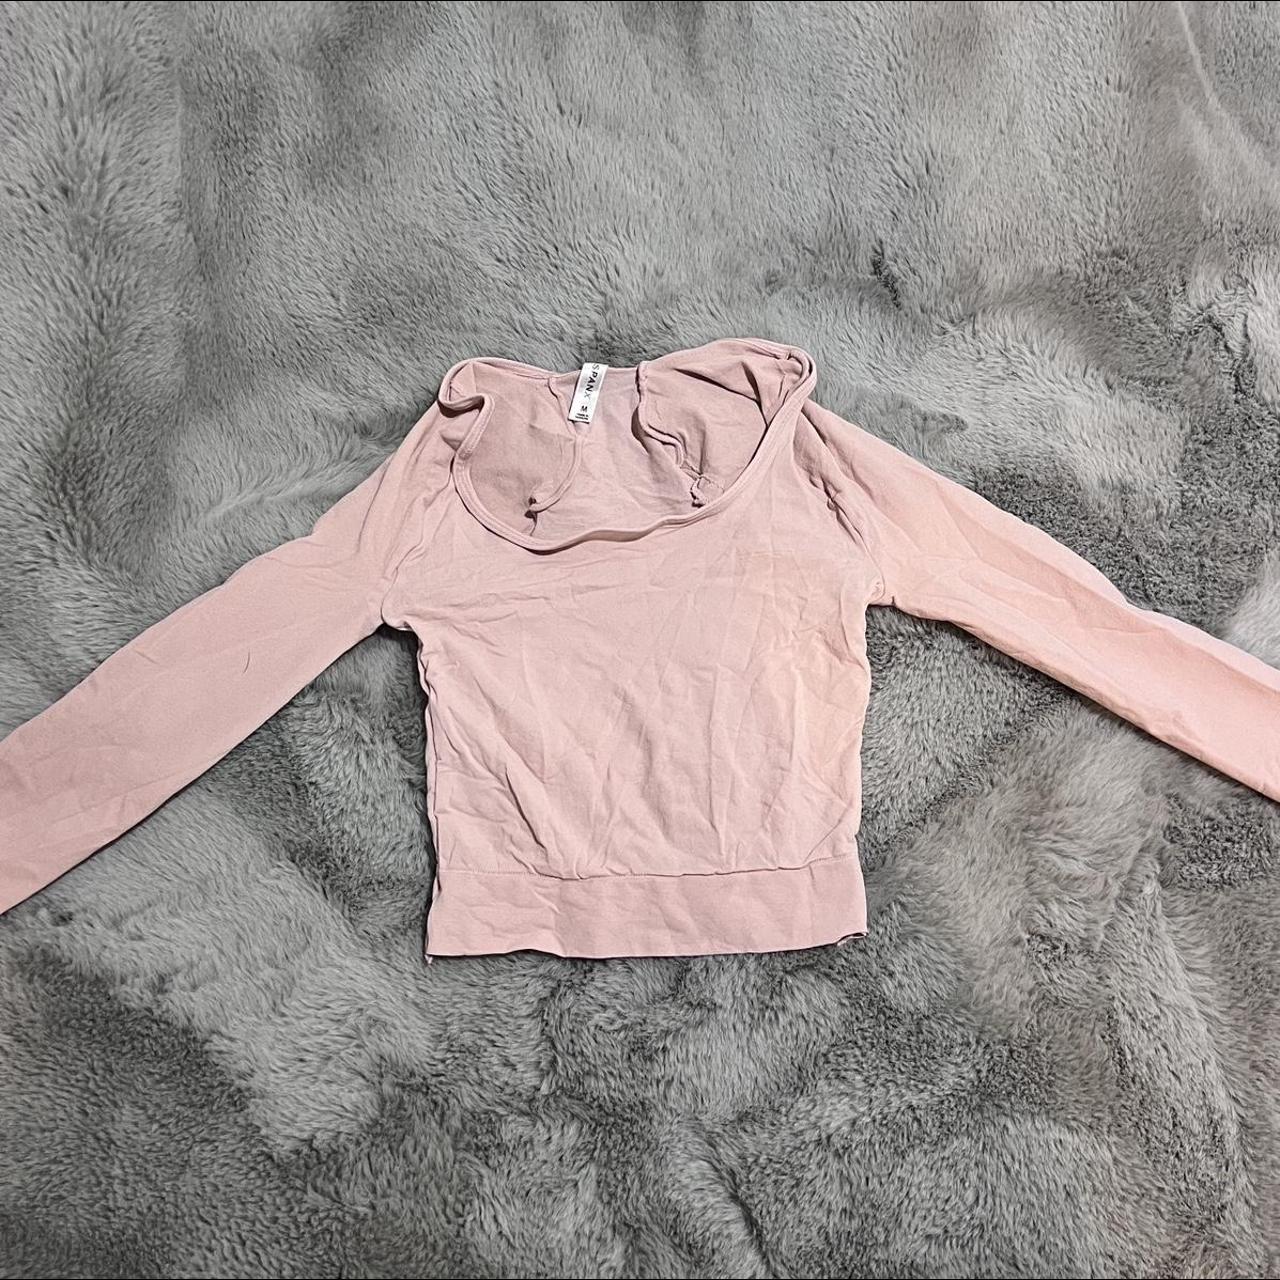 very light pink spanx cropped long sleeve top great - Depop